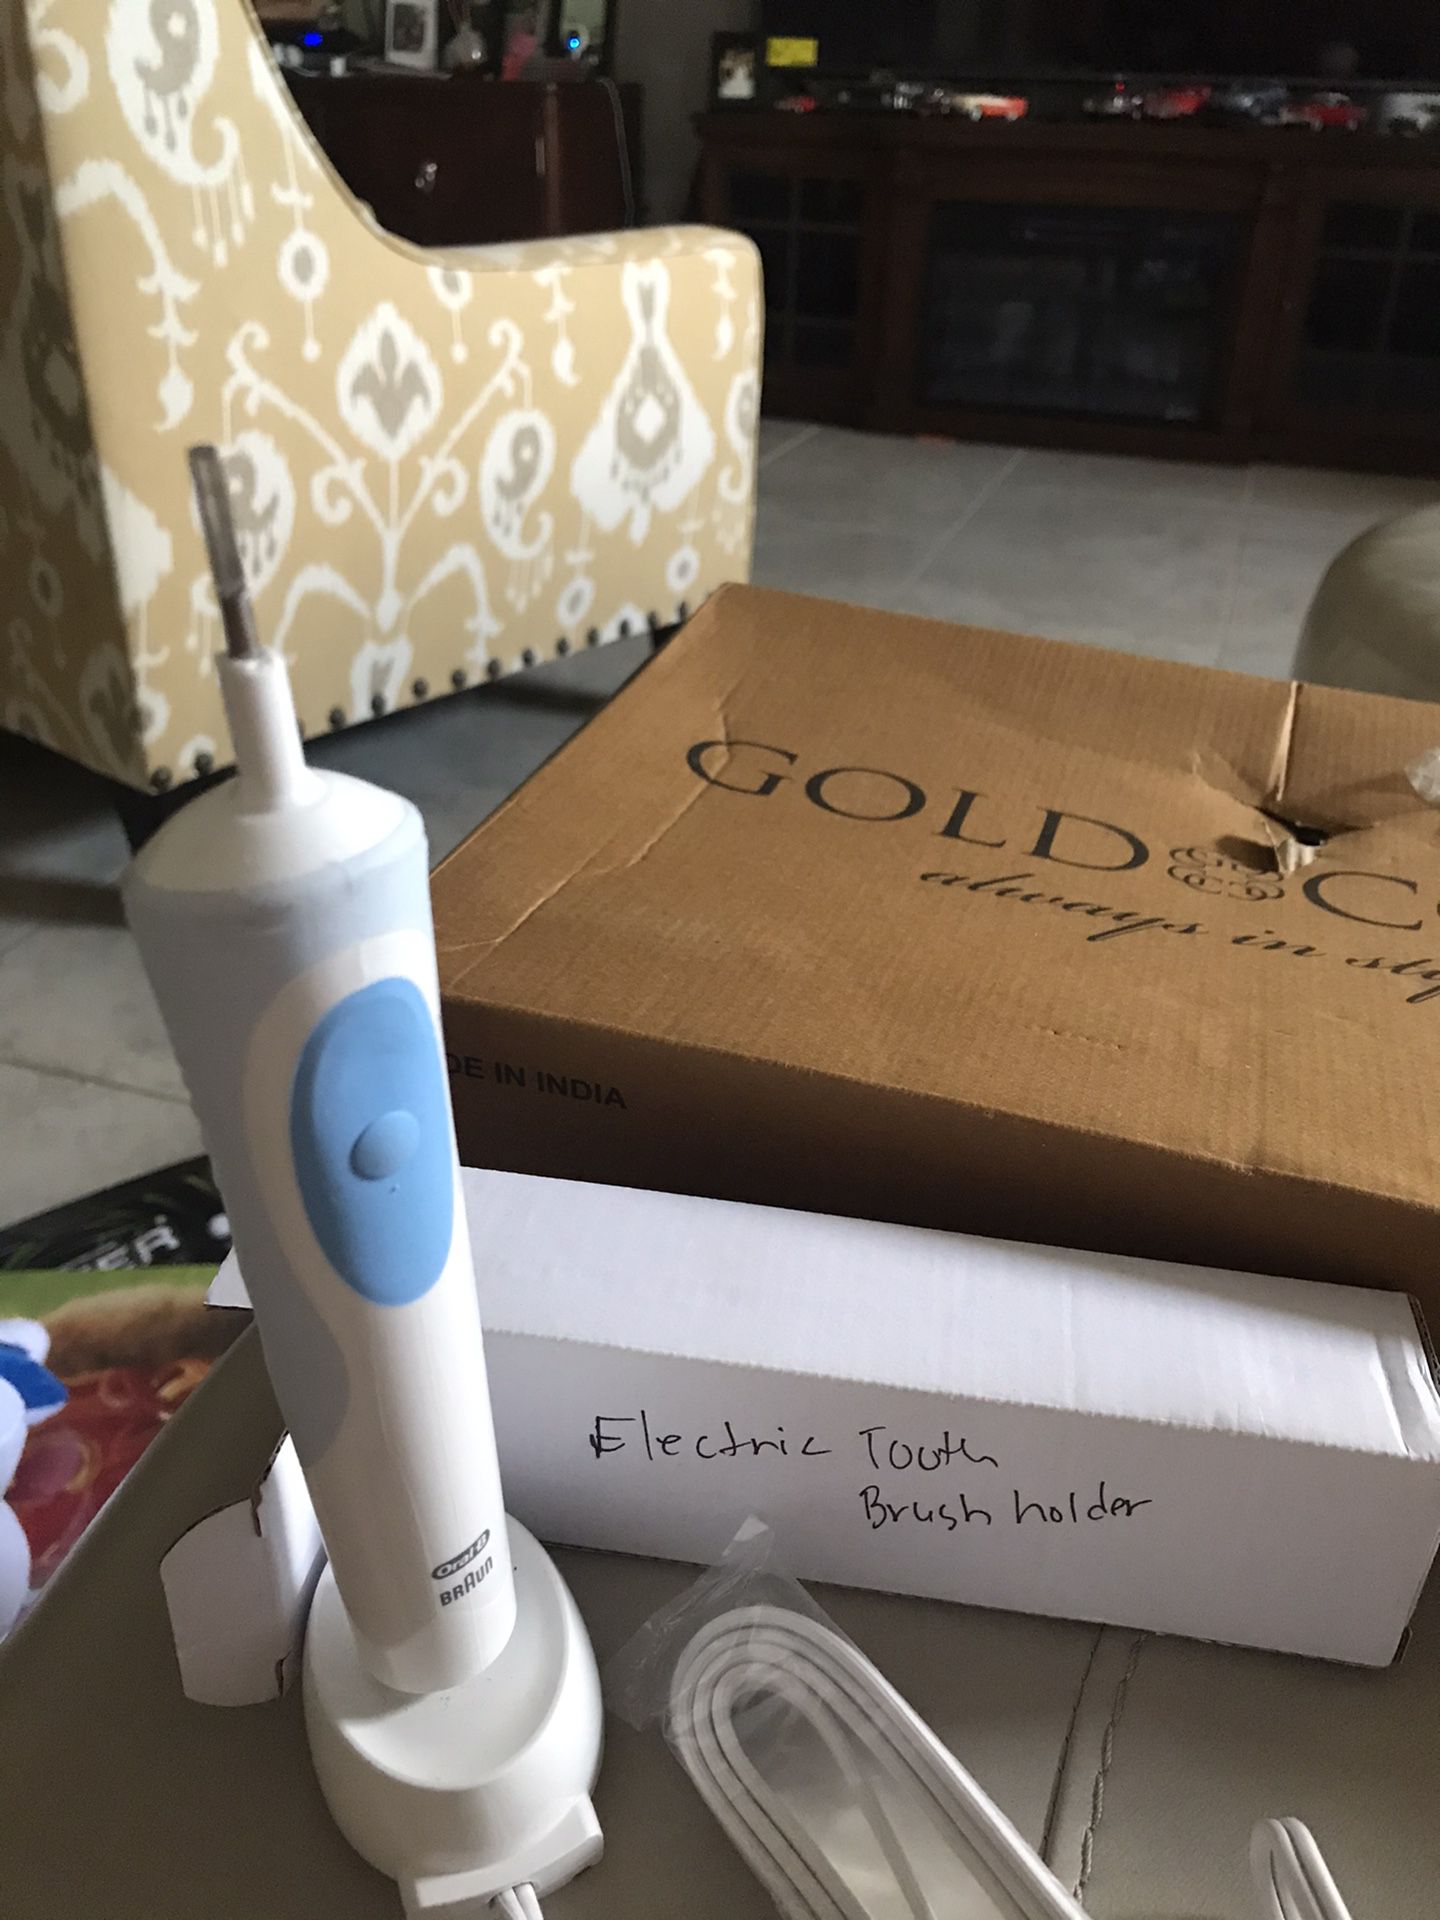 New OralB Electric